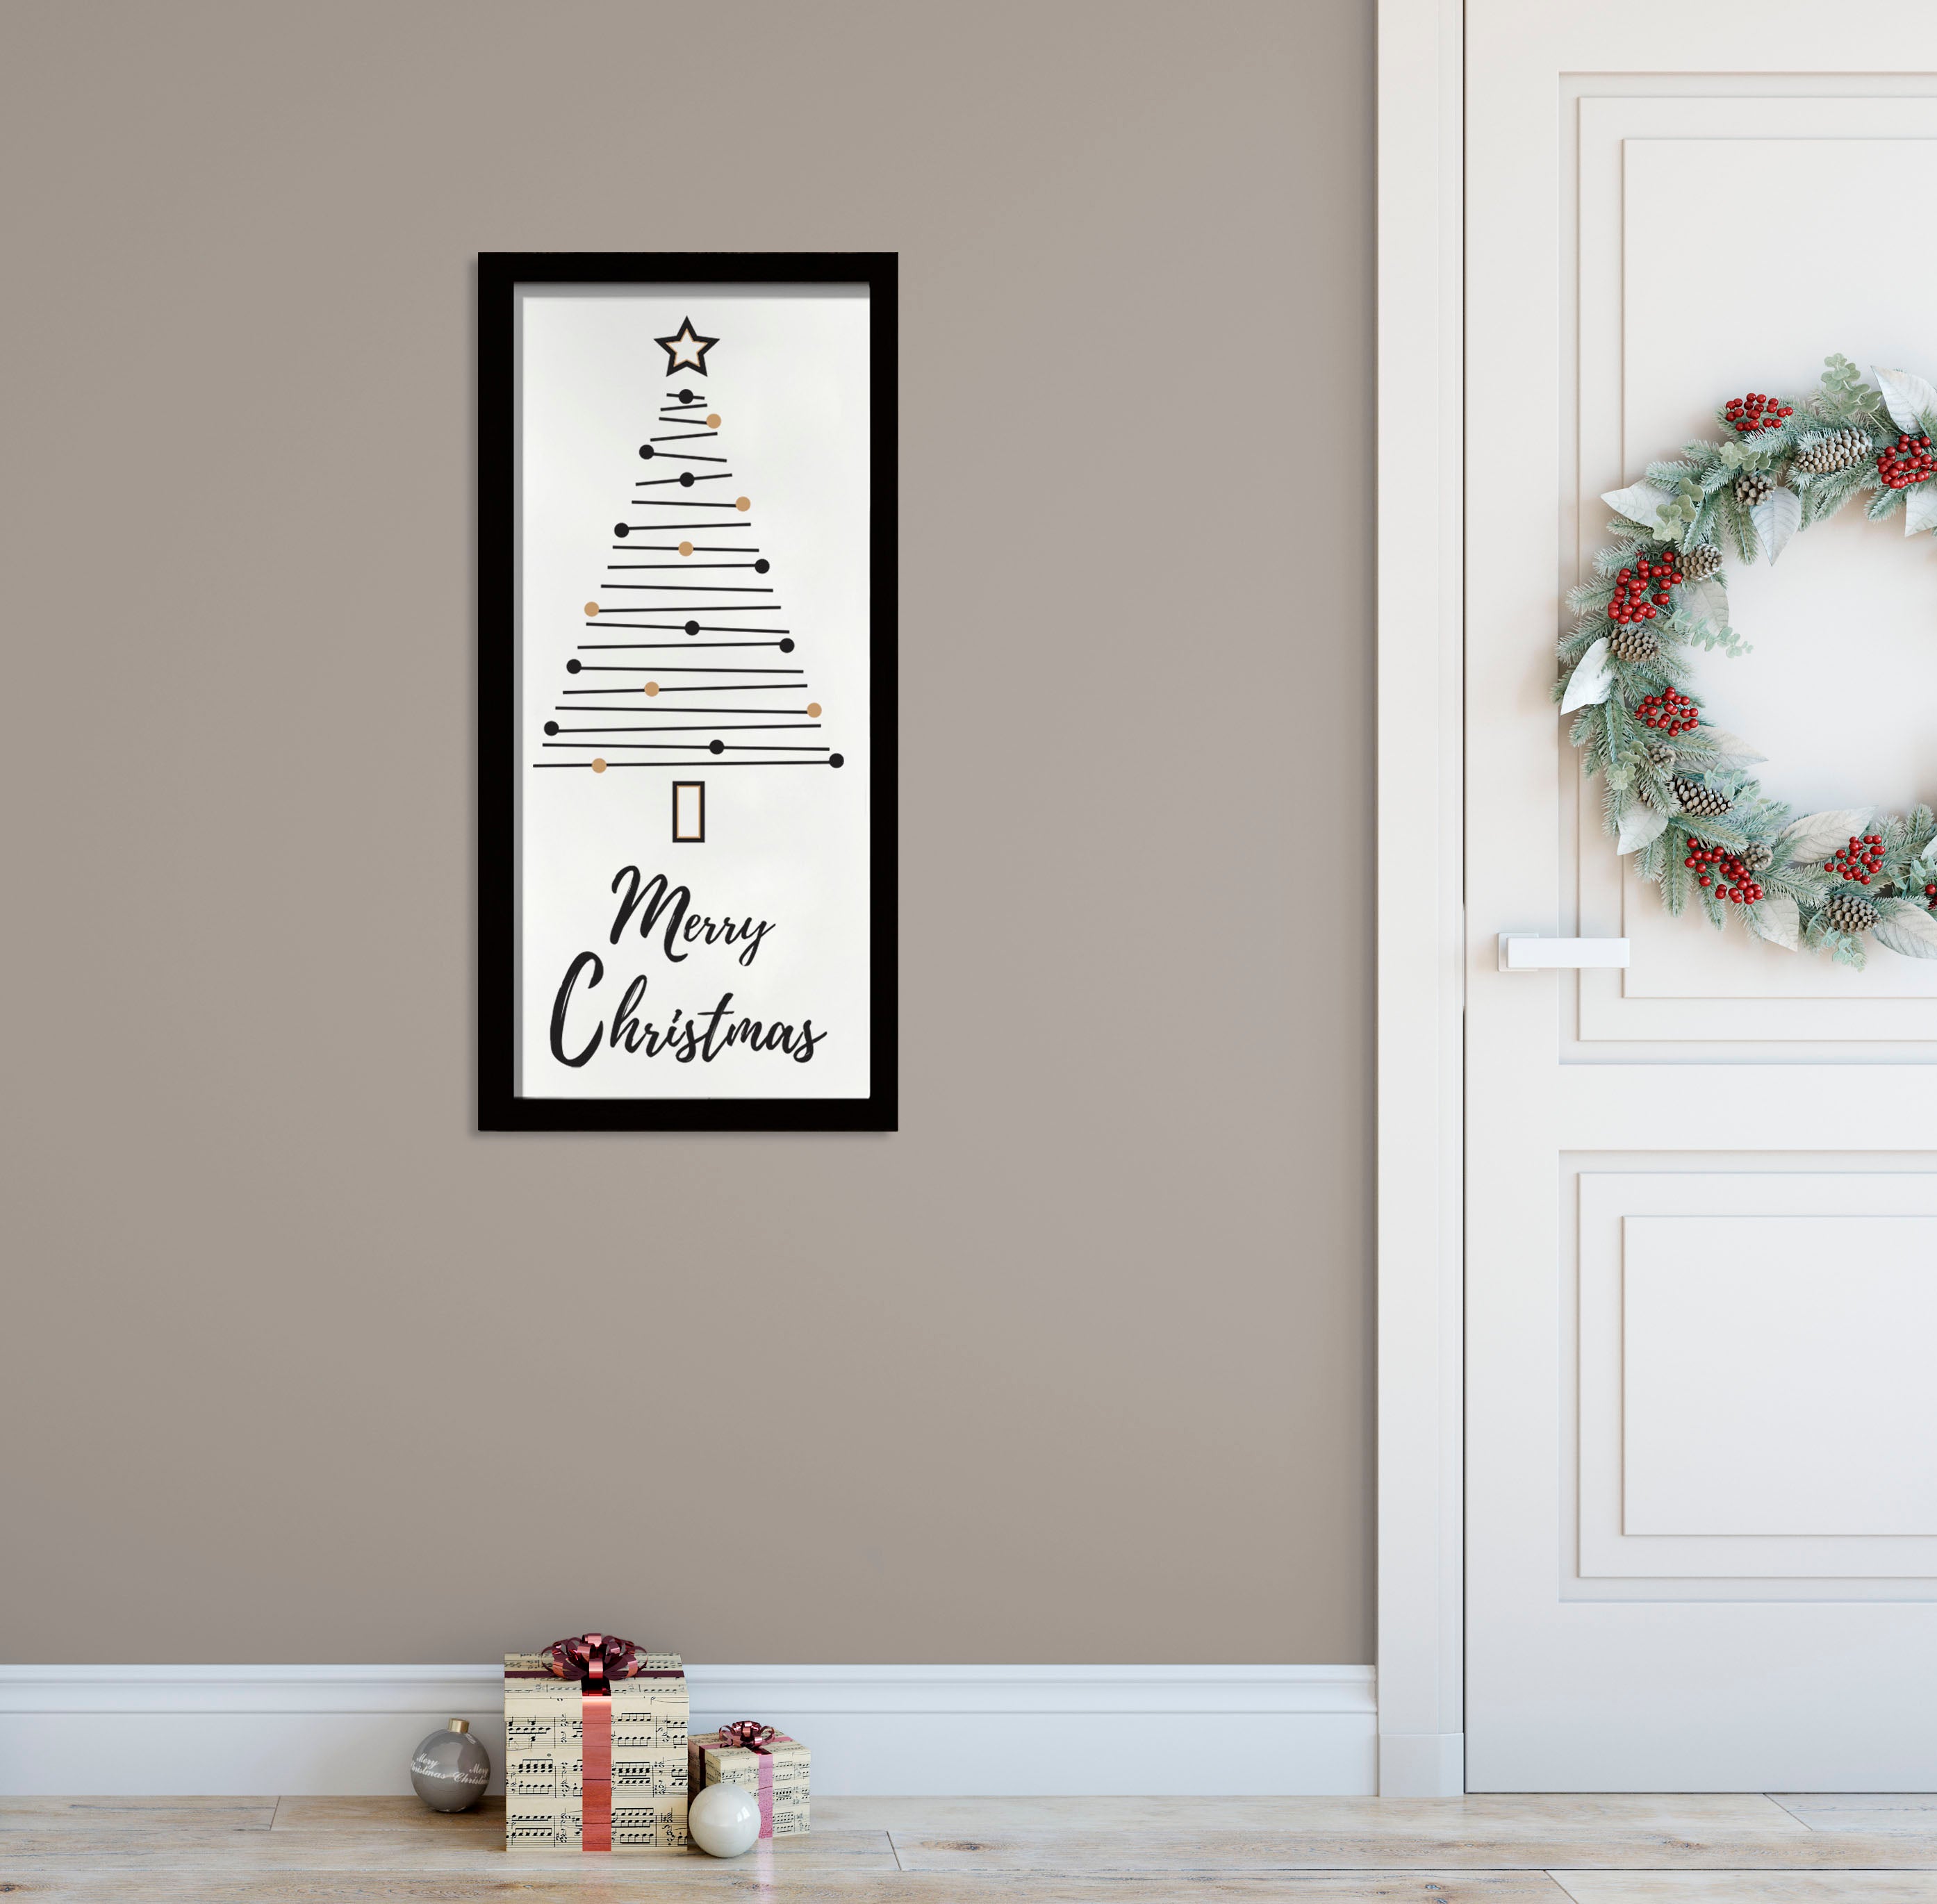 Merry Christmas Tree - Christmas Wood Framed Wall Decor - TheDecorCollection